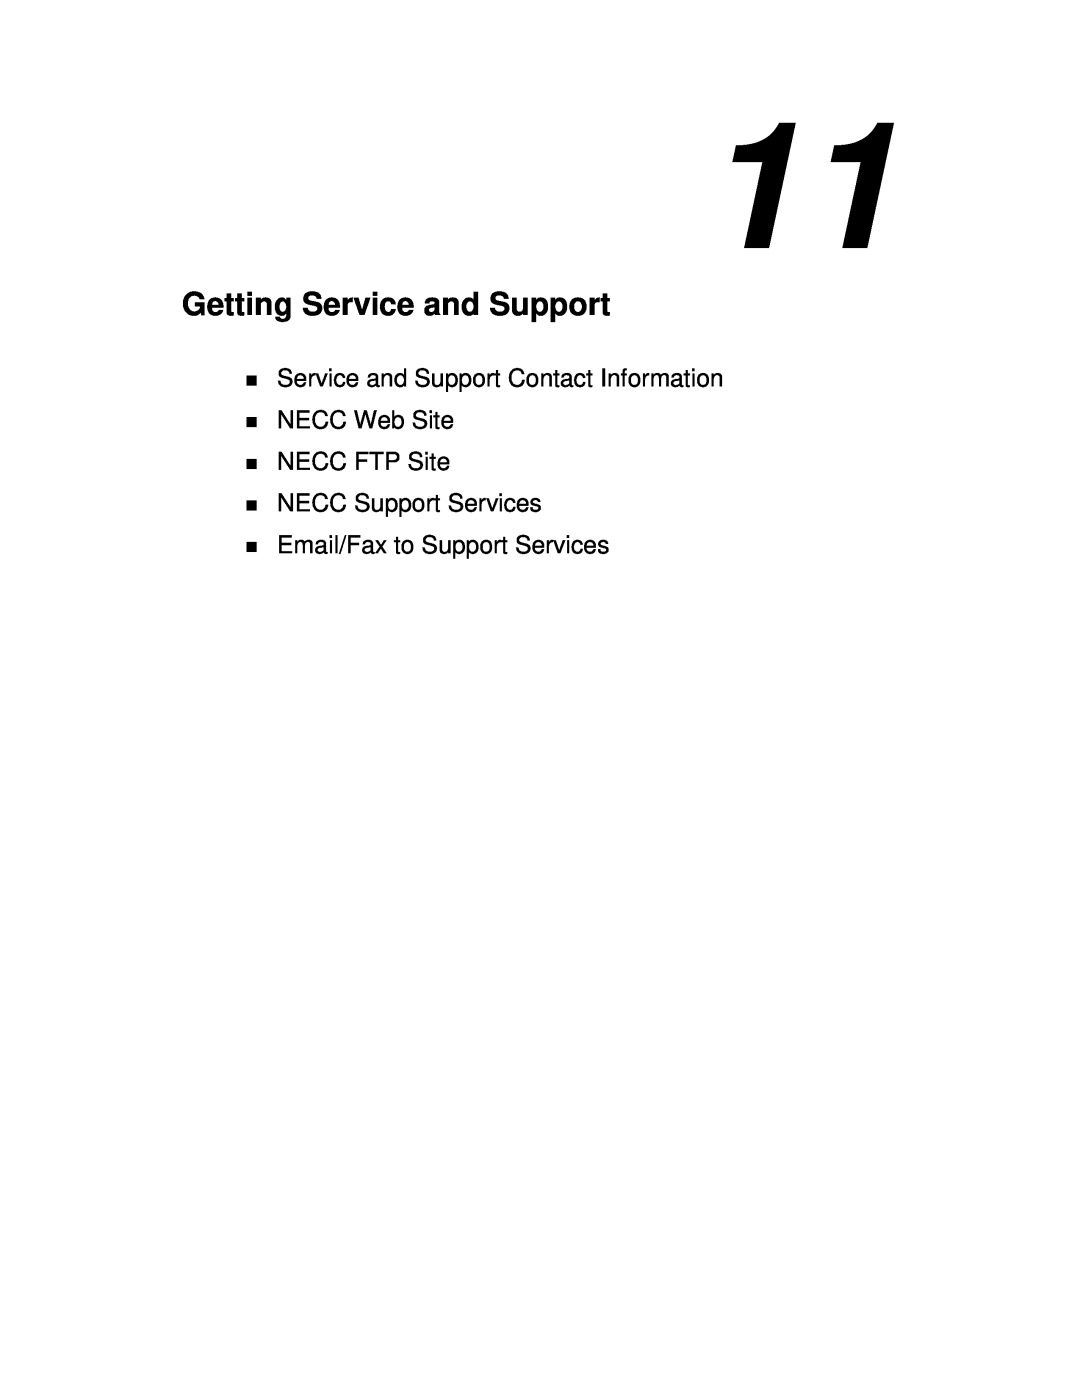 NEC VXi manual Getting Service and Support, Service and Support Contact Information, Email/Fax to Support Services 